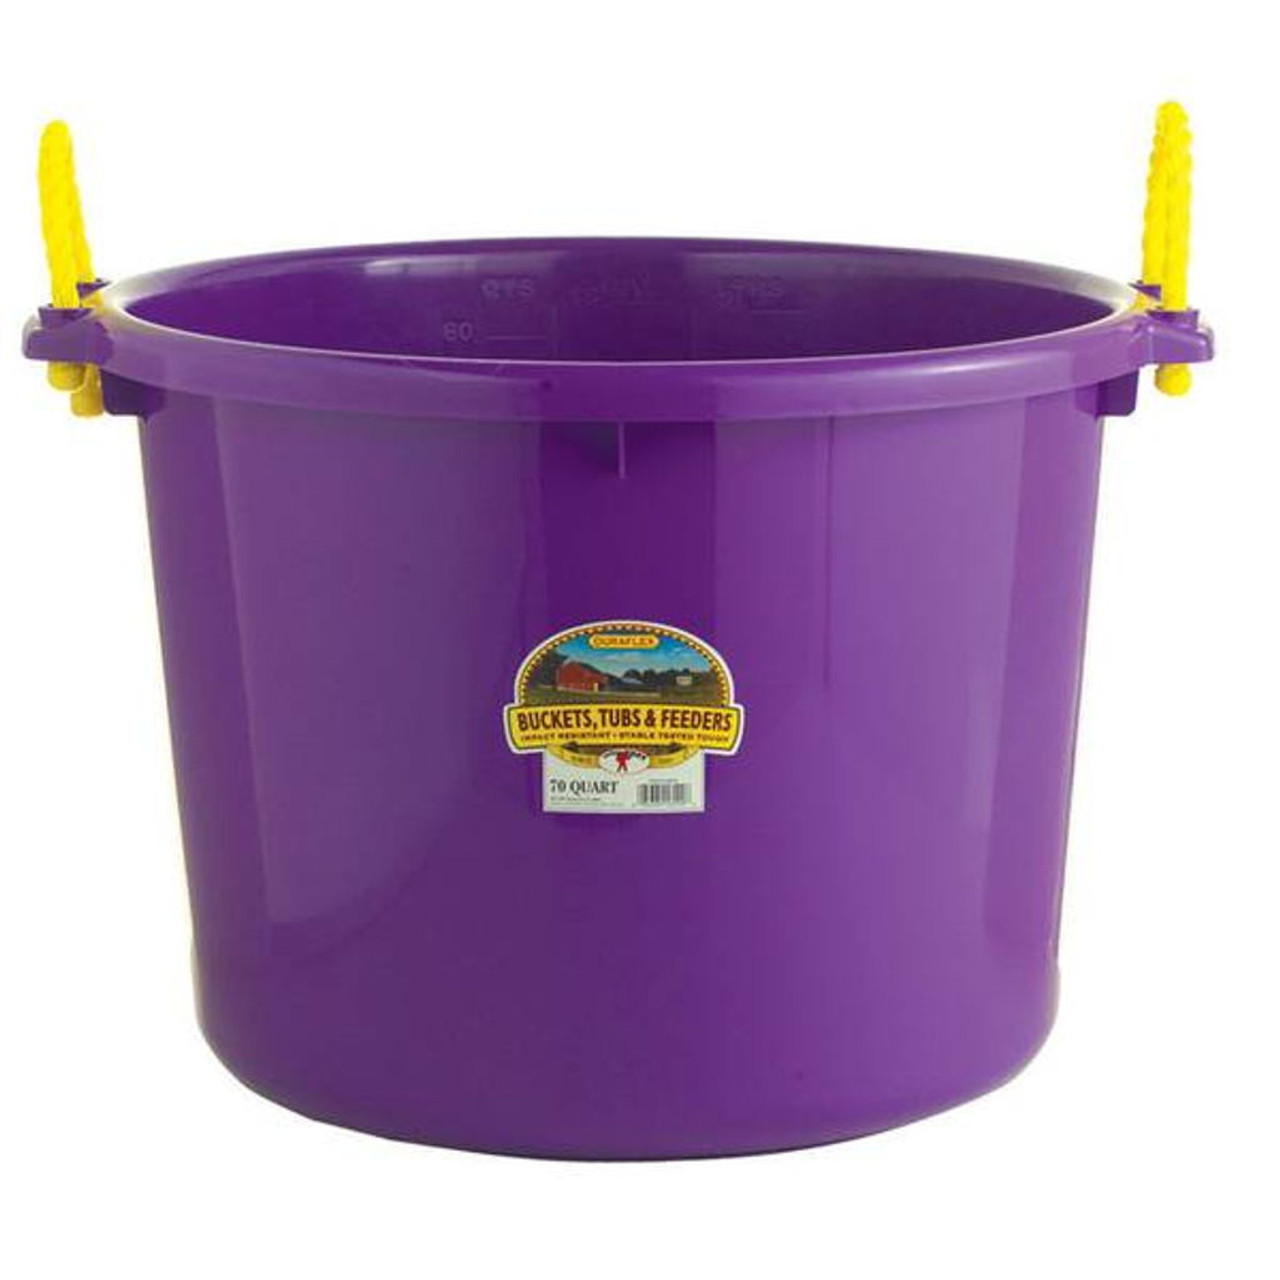 Little Giant 70 Quart Outdoor Polyethylene Muck Tub Multi Purpose Utility  Bucket with Handles, for Gardening and Farming, Hot Pink